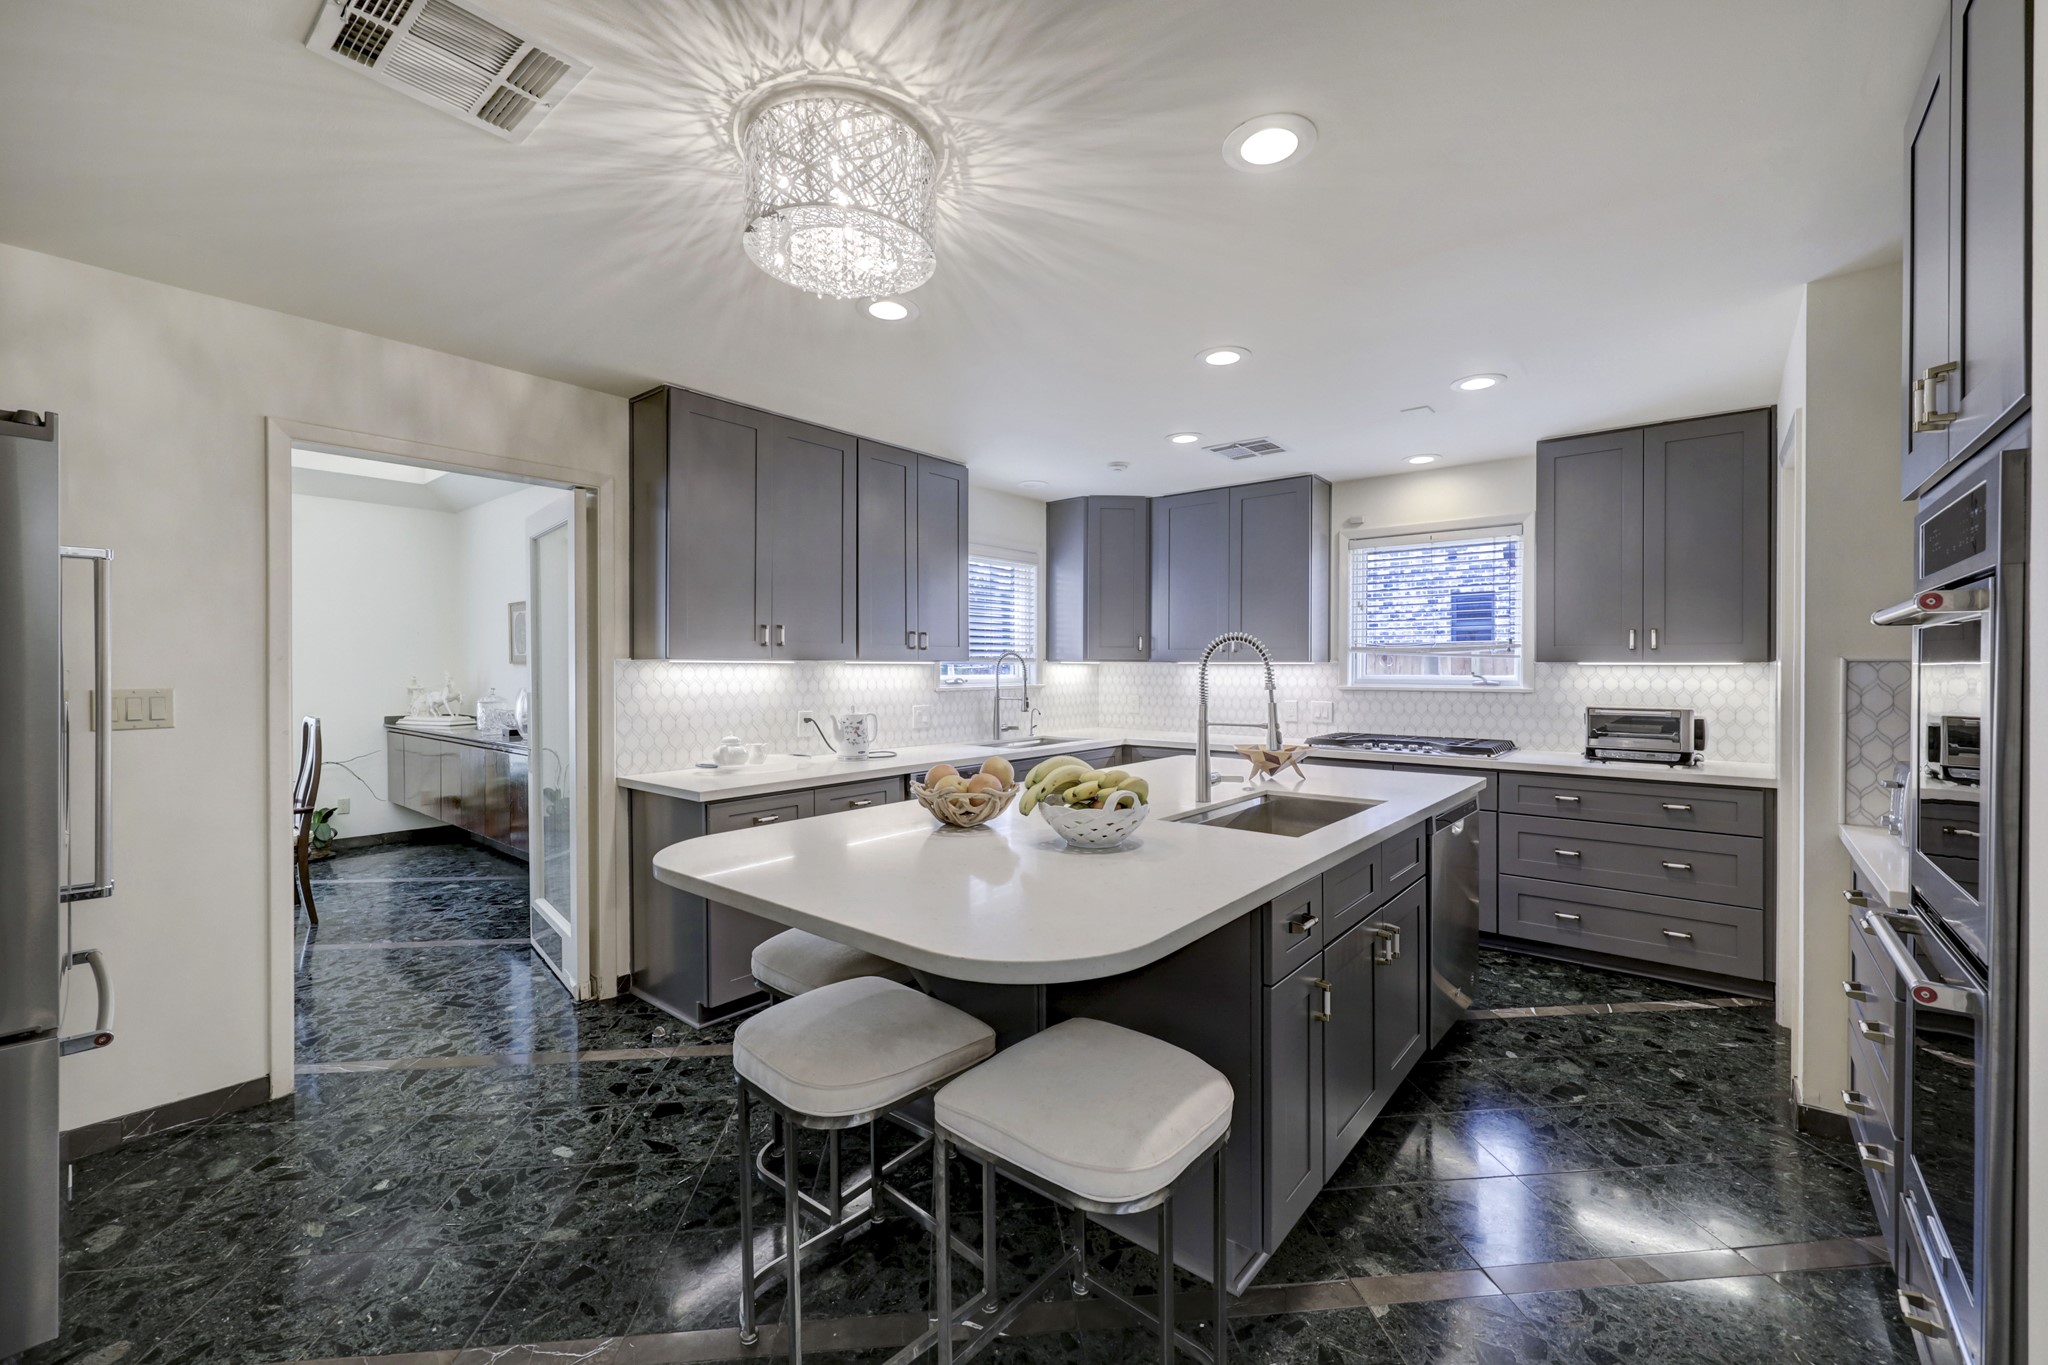 The kitchen was previously renovated with new soft close cabinetry, backsplash tile, stainless steel appliances, counter lighting and quartz countertops.